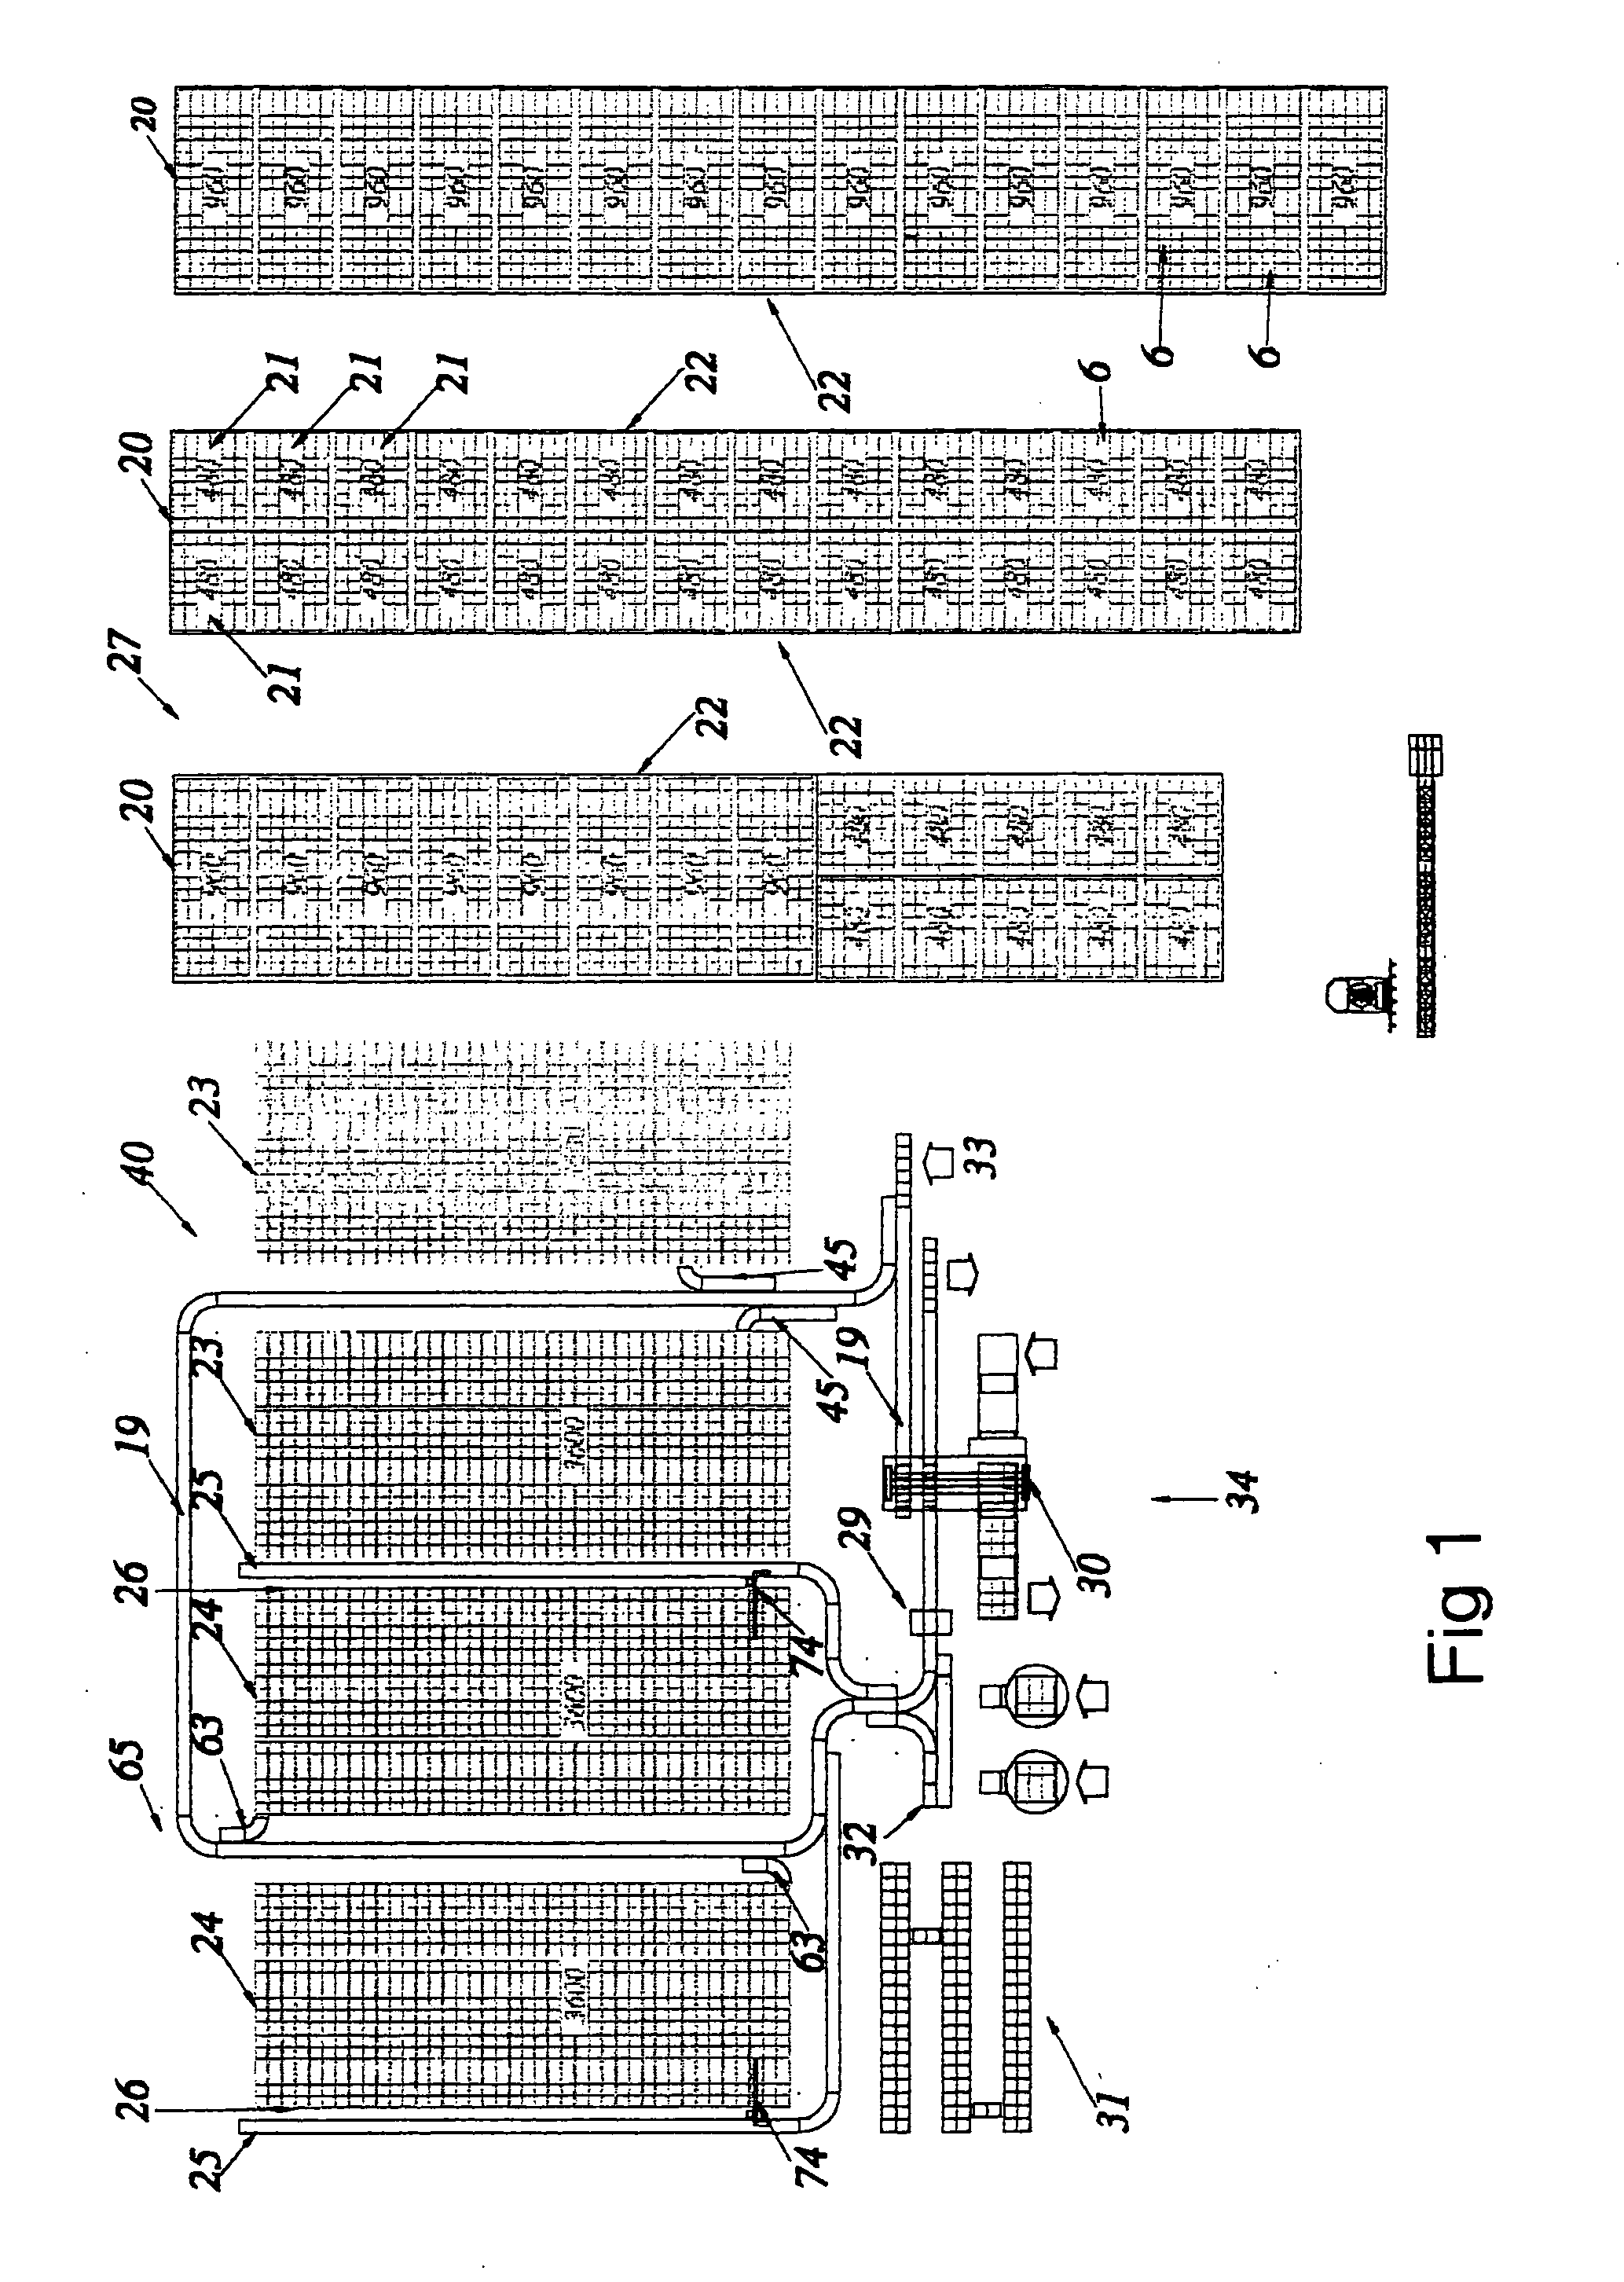 Method and apparatus for container storage and container retrieval